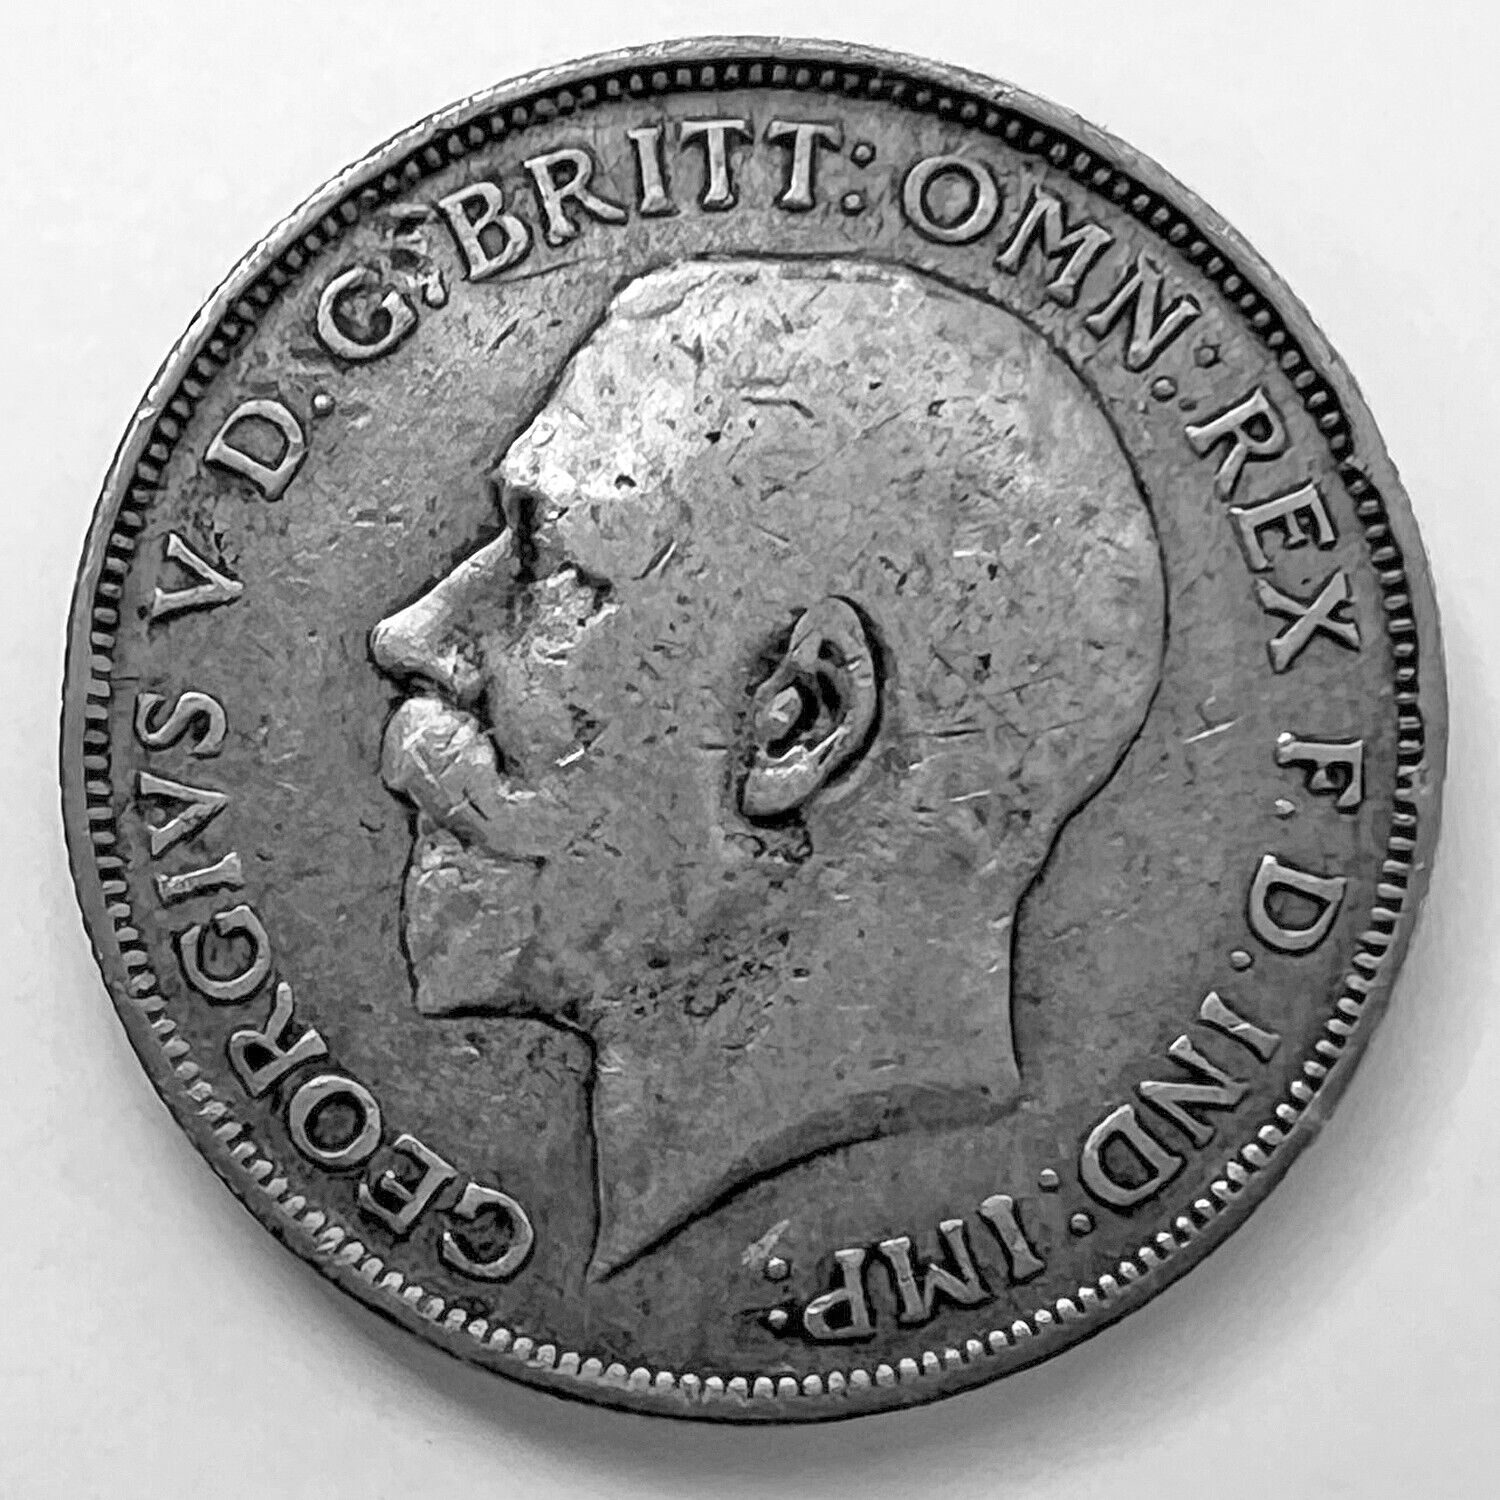 1912 Great Britain 0.925 Silver Florin King George United Kingdom UK Coin KM#817